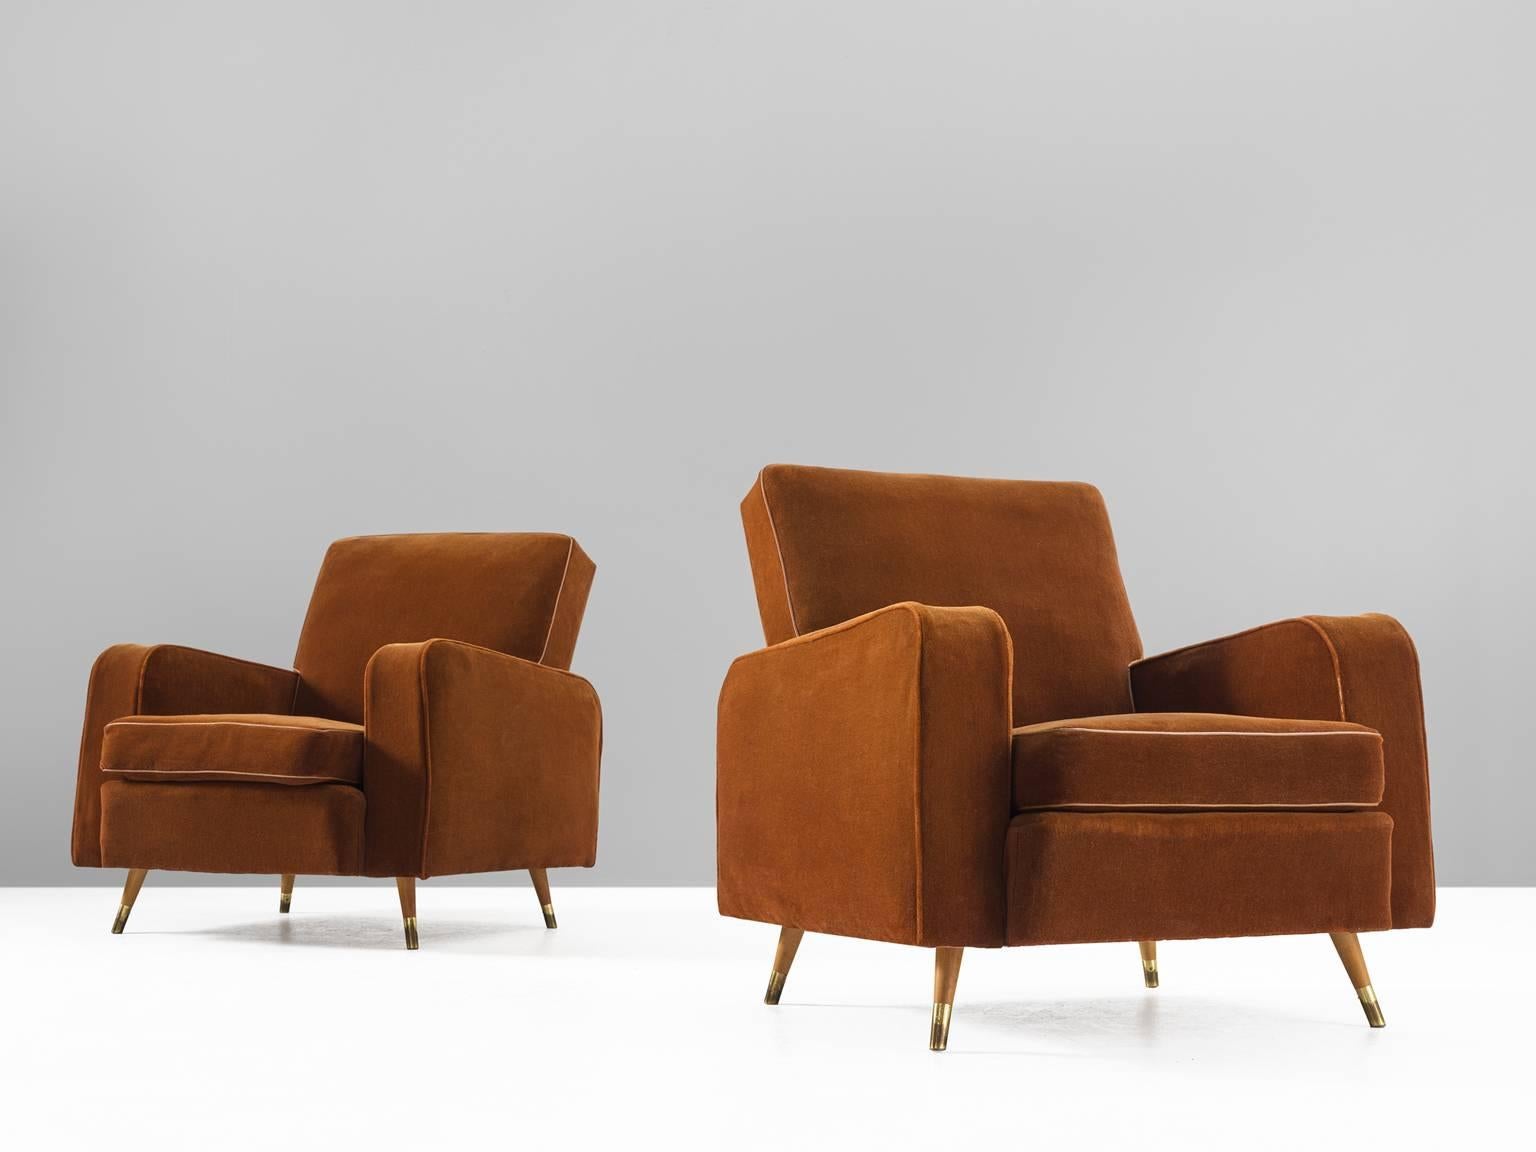 Armchairs, velvet, oak and brass, Italy, 1950s.

This pair of grand comfortable arm chairs are strong and playful at the same time. The back, which is slightly tilted towards the back gives perfect support for the back. The color of these two chairs